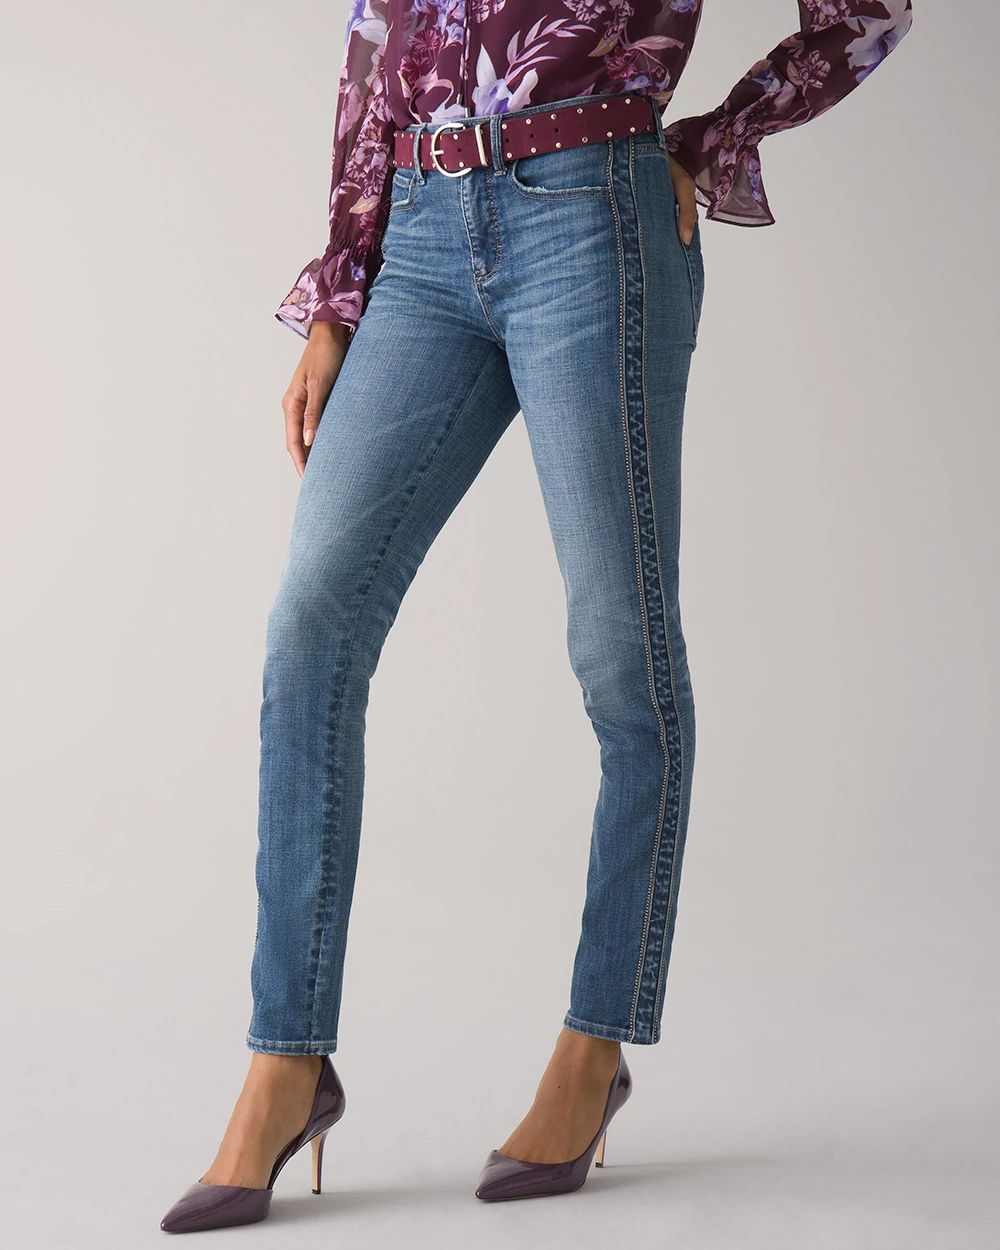 Petite High-Rise Everyday Soft Denim  Novelty Side Stripe Slim Ankle Jeans click to view larger image.